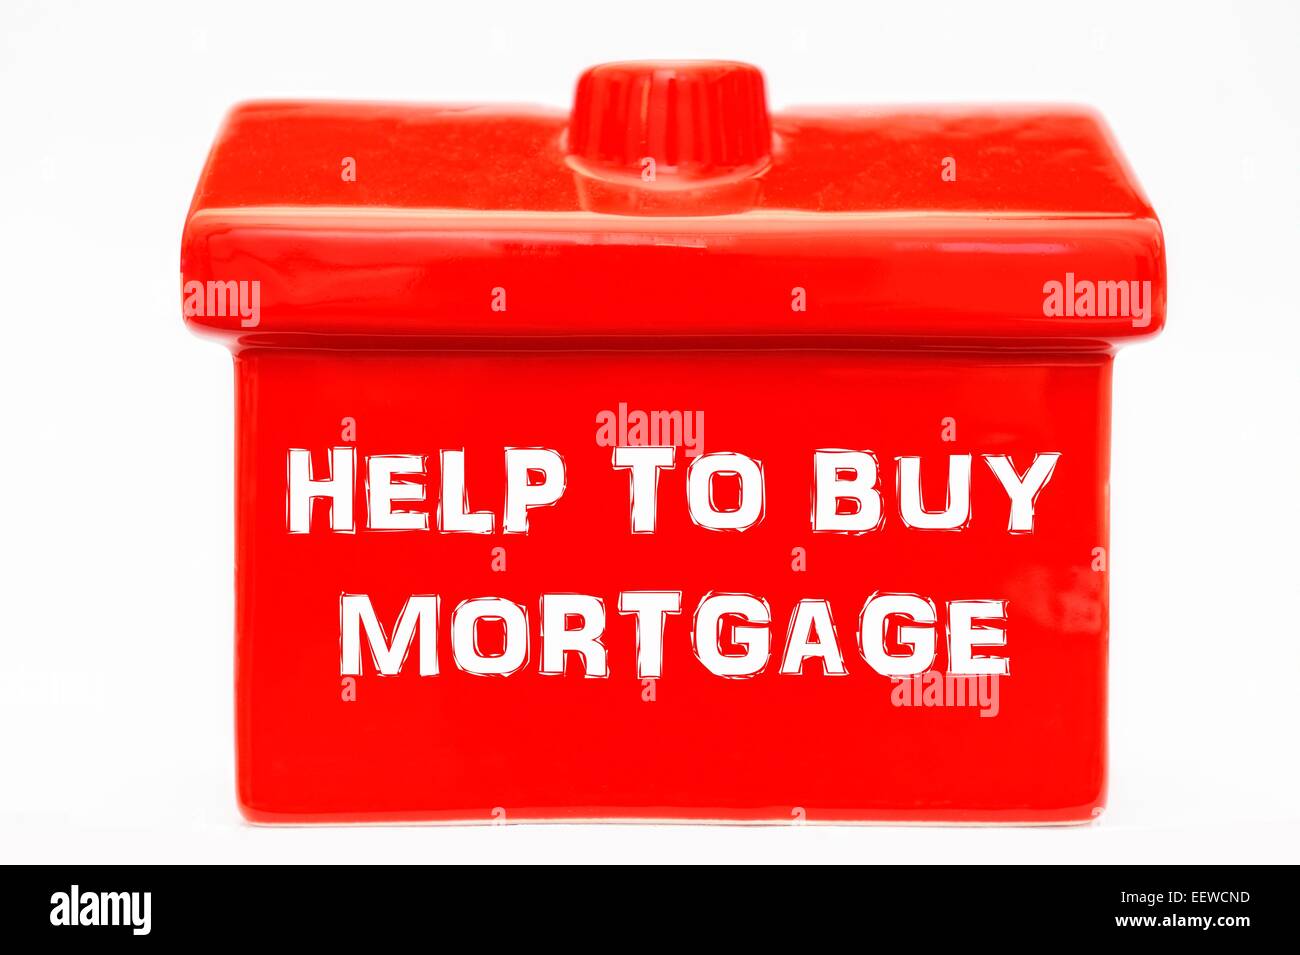 Government help to buy mortgage on a red house Stock Photo